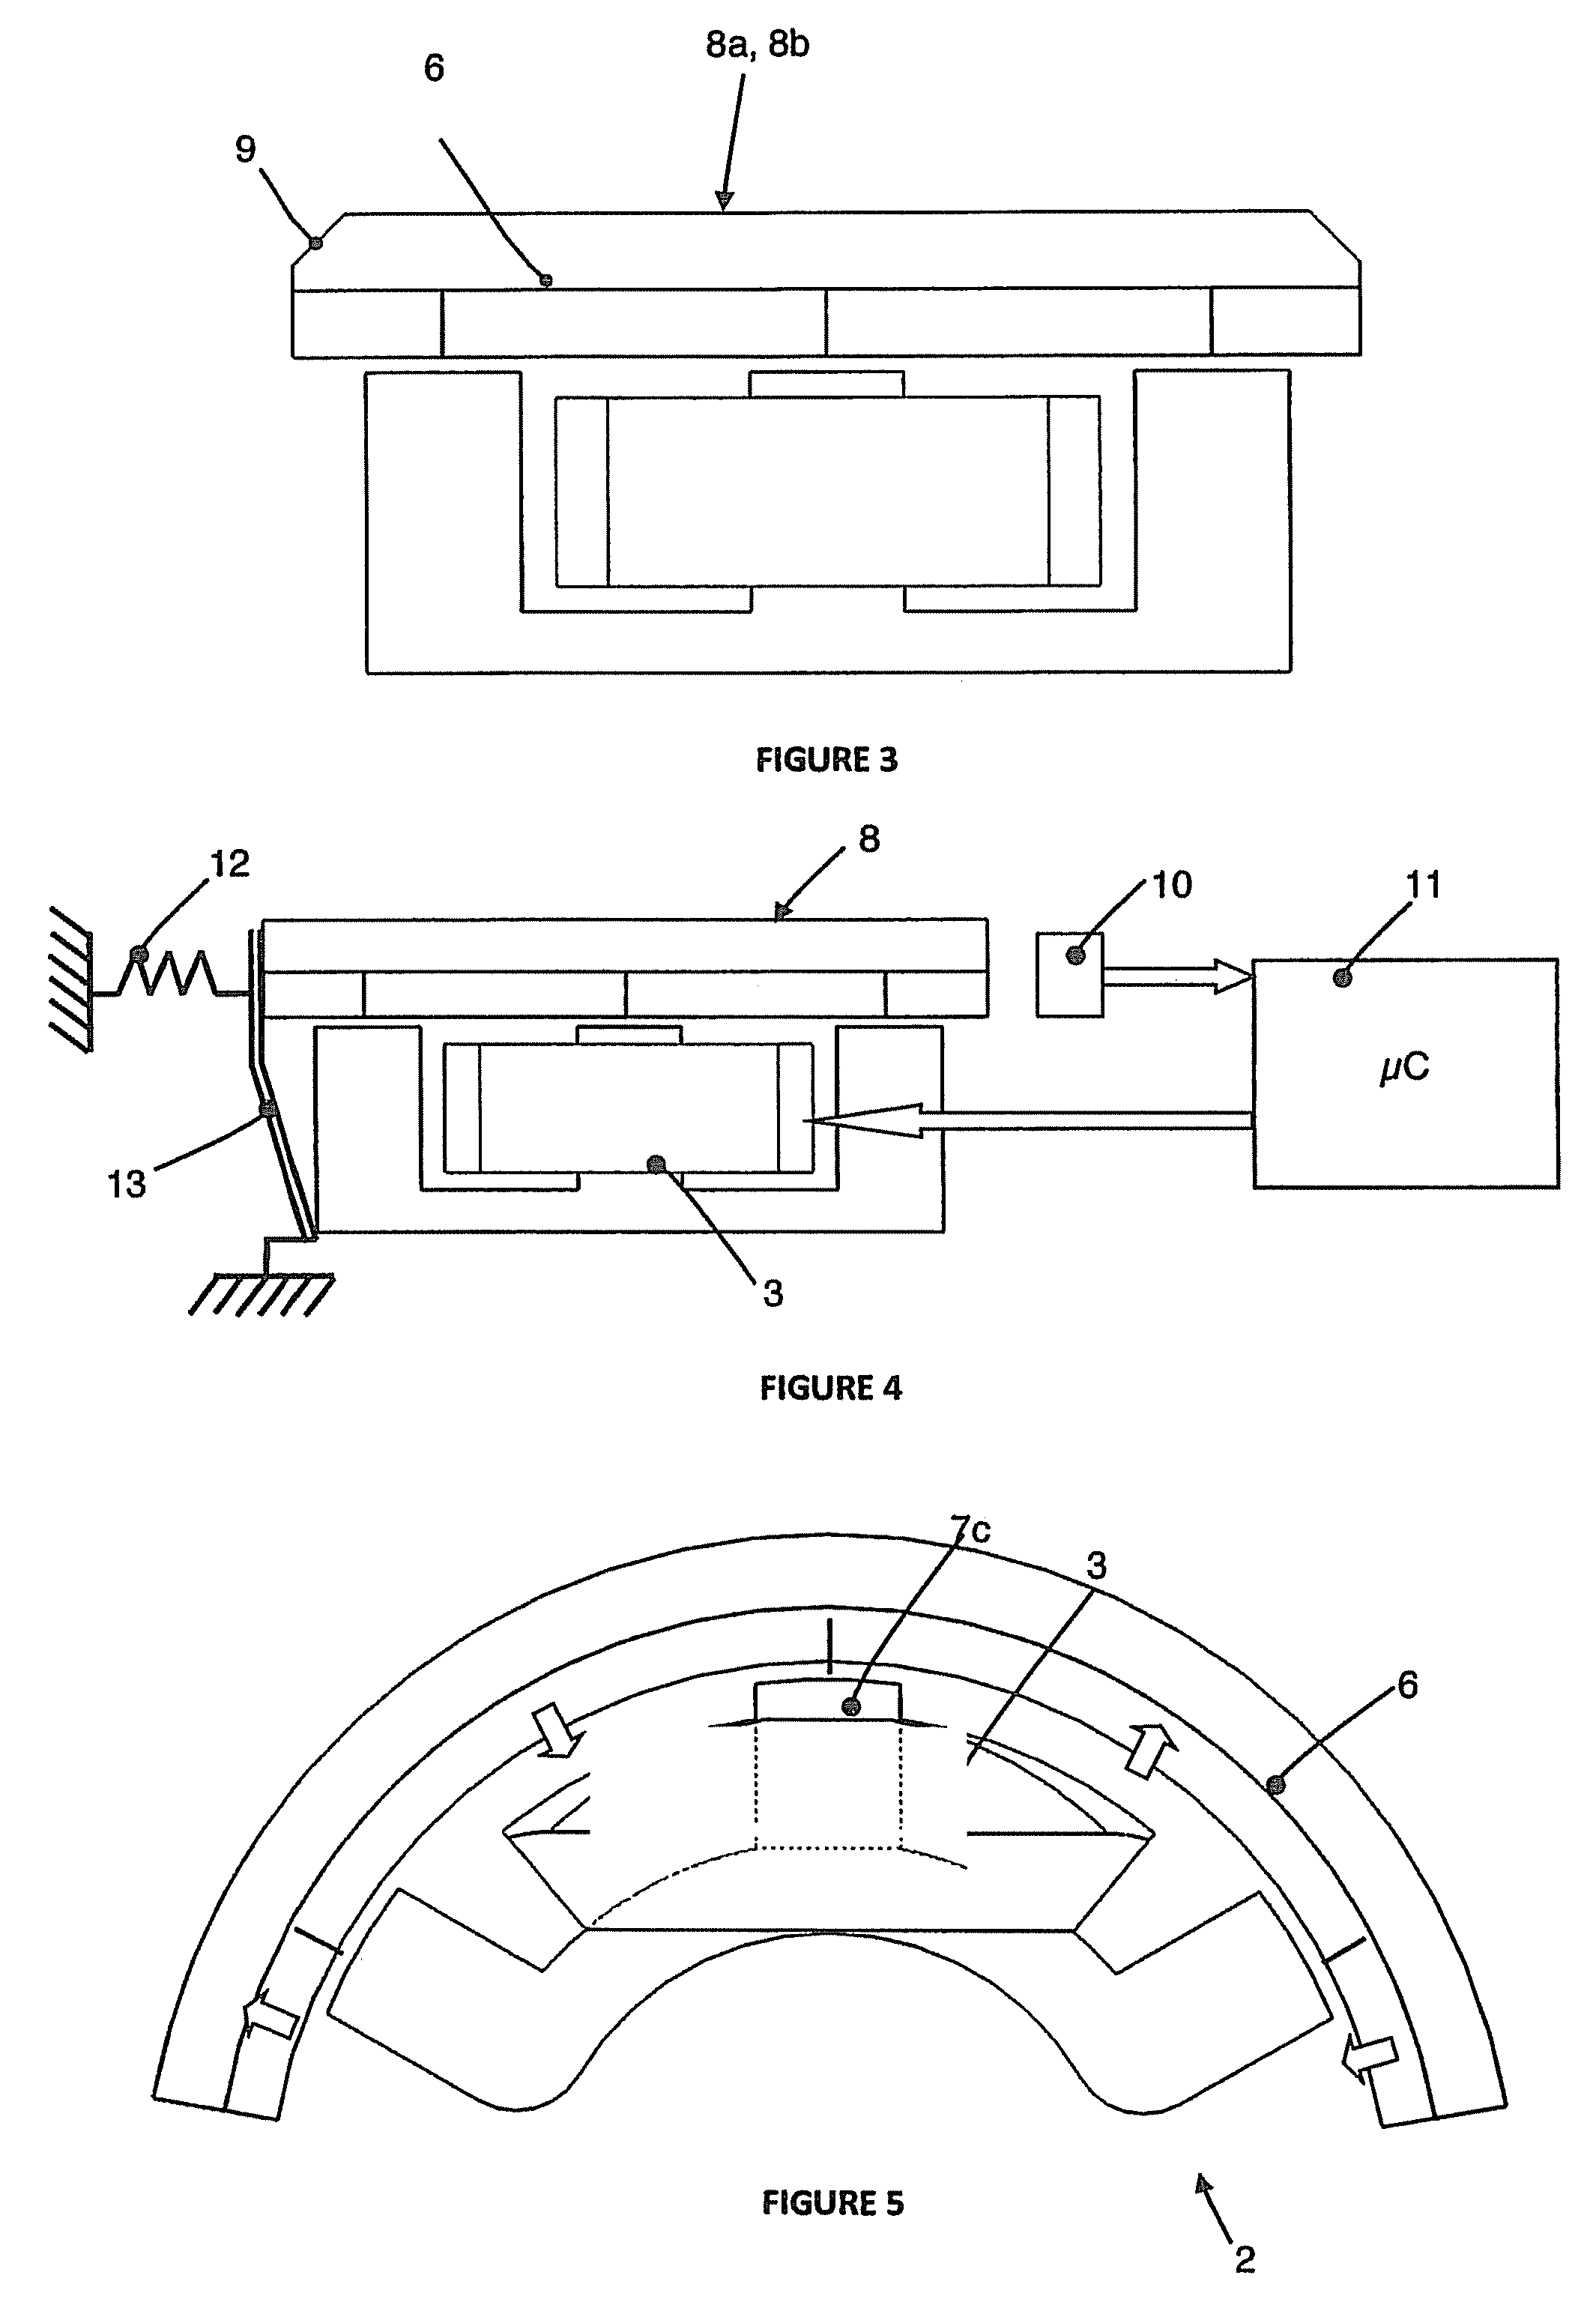 Electromagnetic actuator having improved force density and use thereof for an electric razor